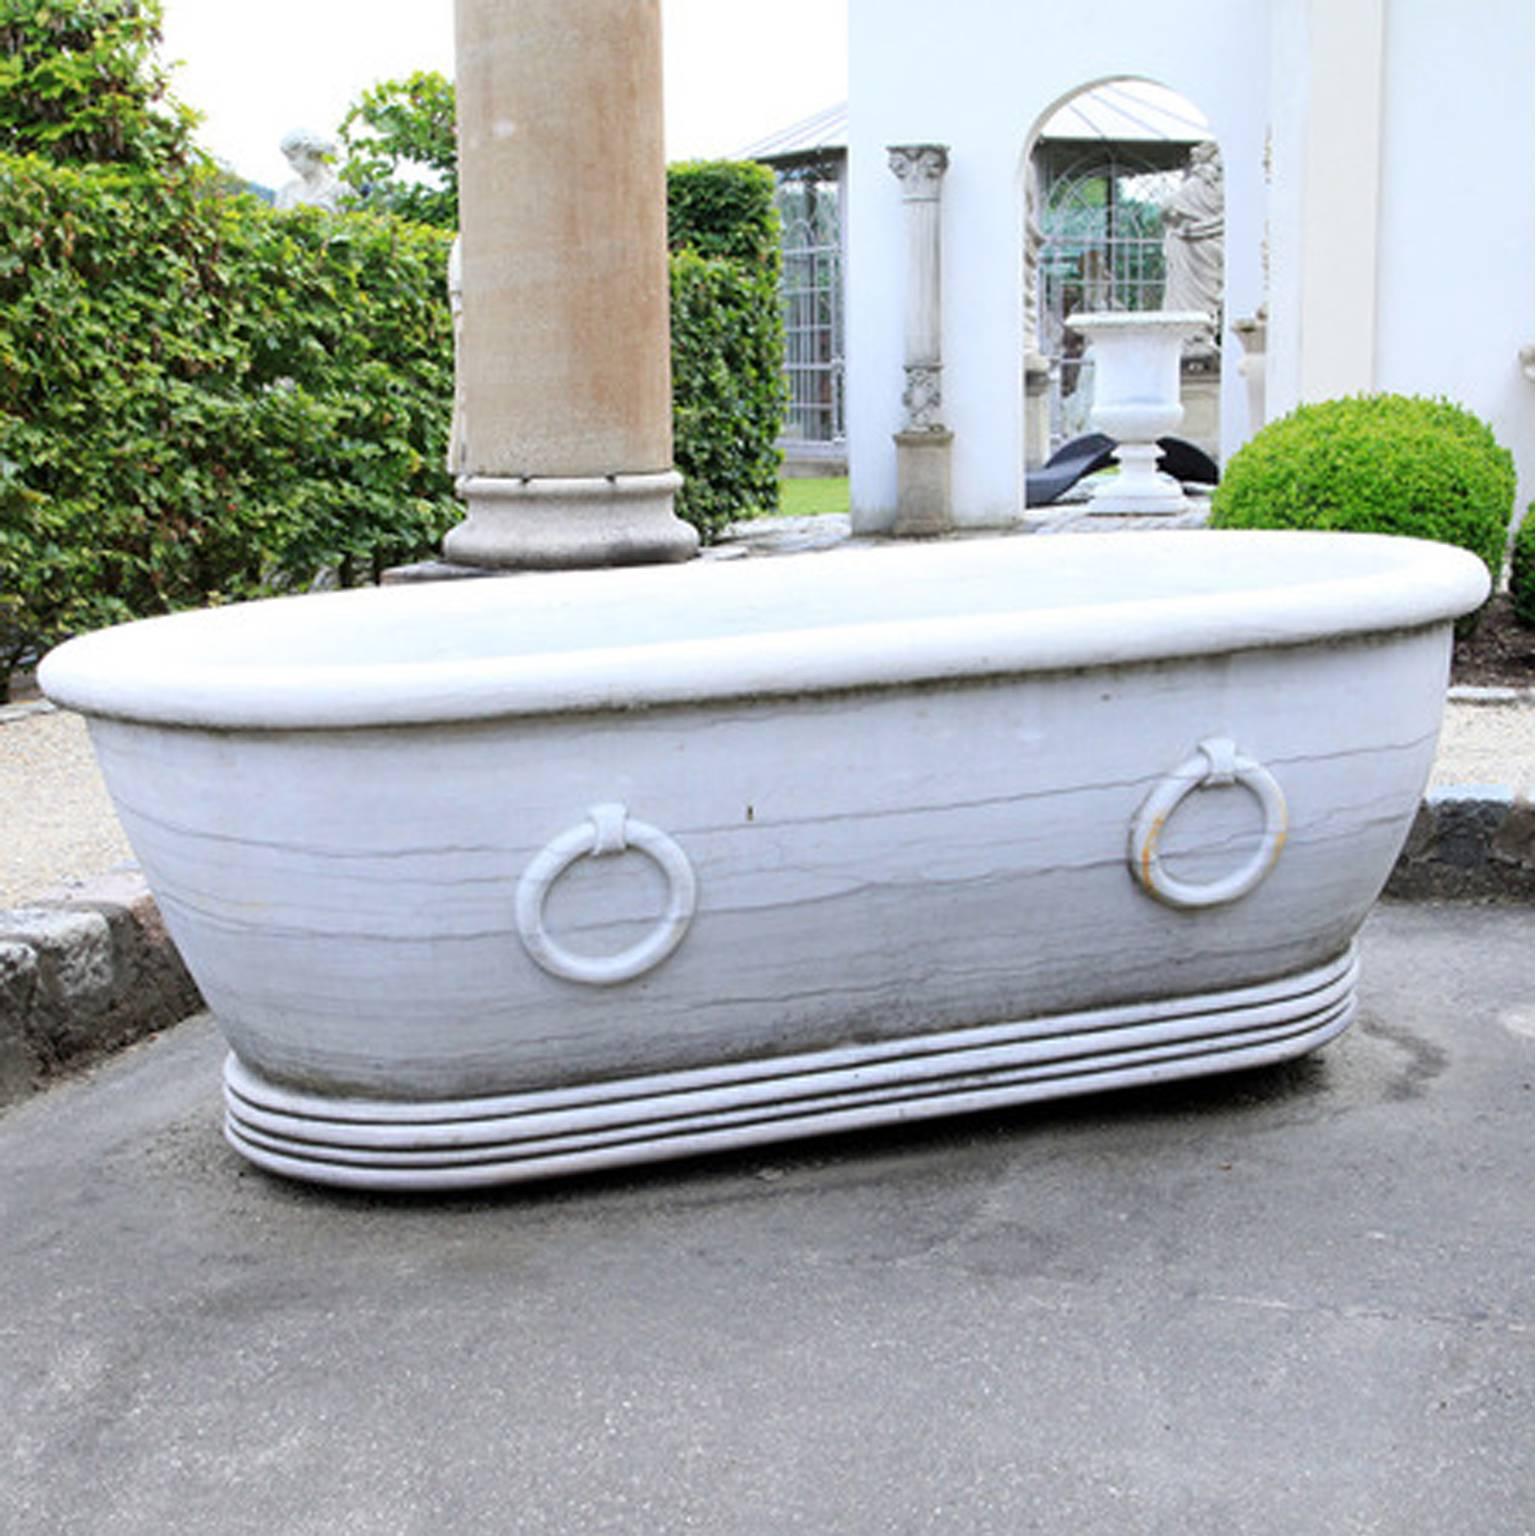 Oval bath tub with stylized rings on the wall and profiled stand, out of marble and designed for the garden.